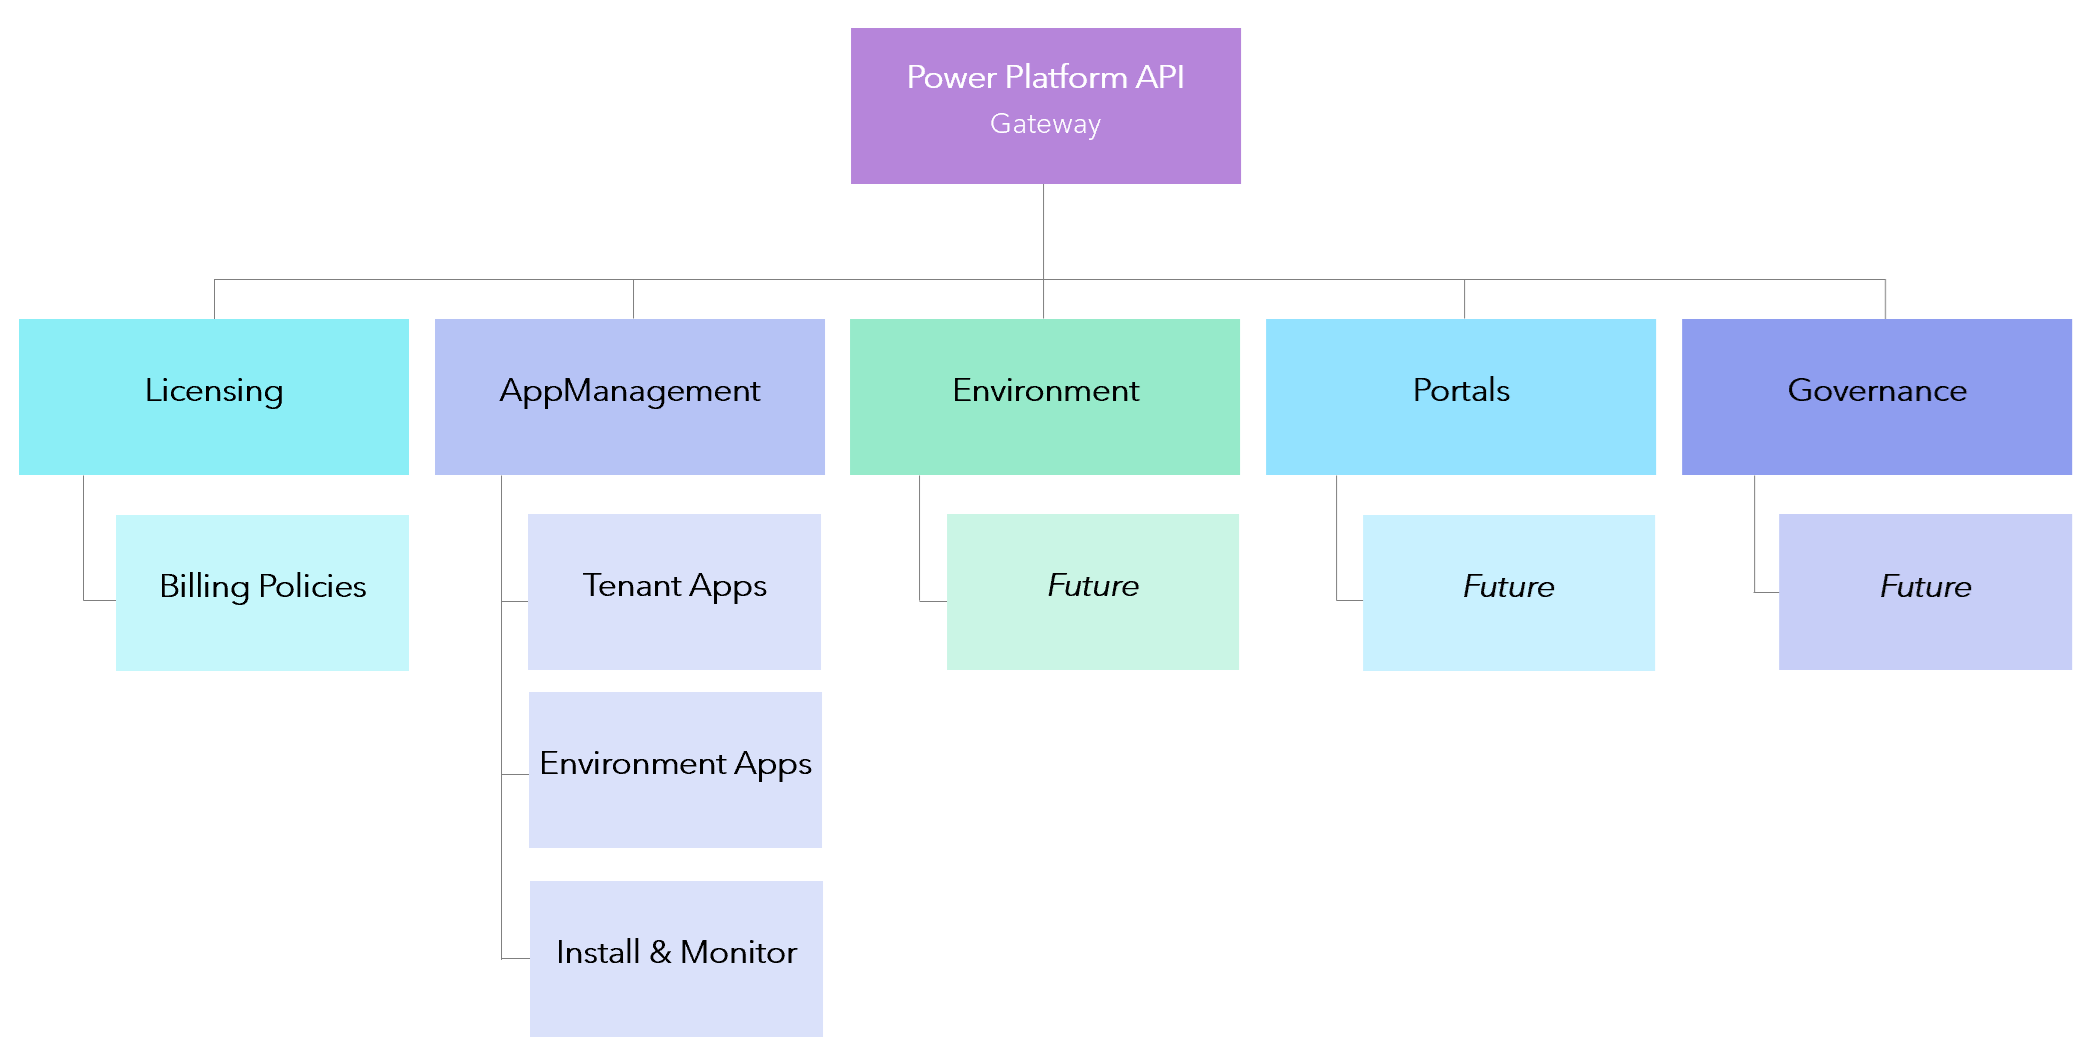 Power Platform API gateway harmonizes features from various areas of the admin experience in to a single API endpoint.